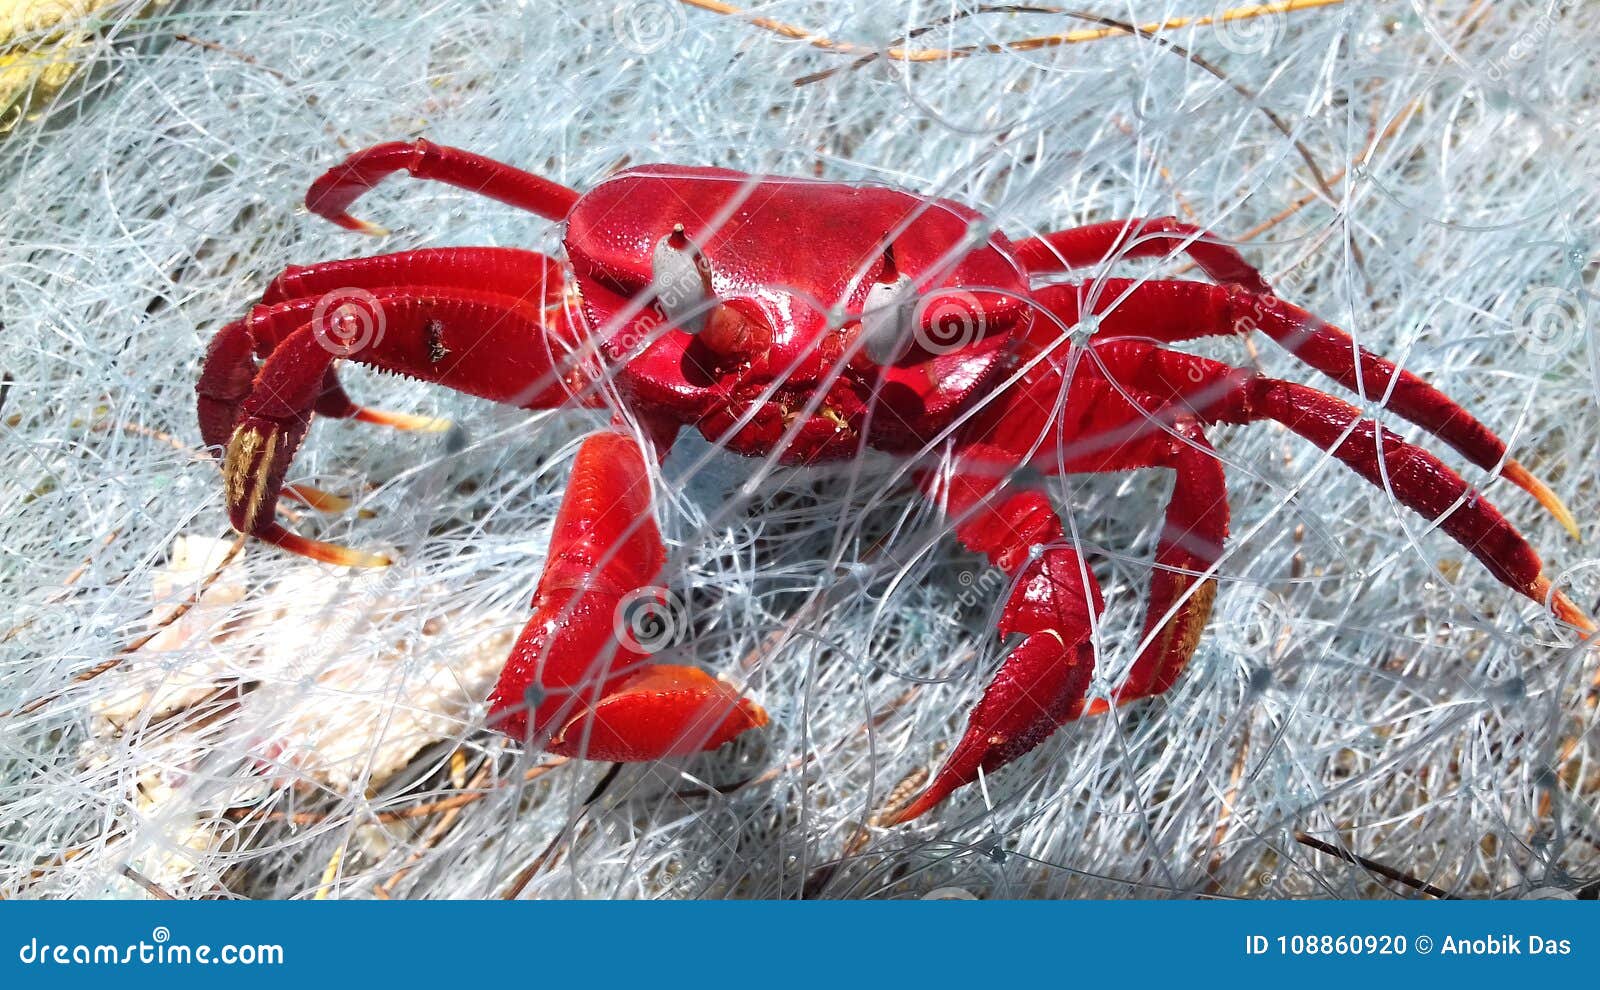 9,421 Crab Net Royalty-Free Photos and Stock Images